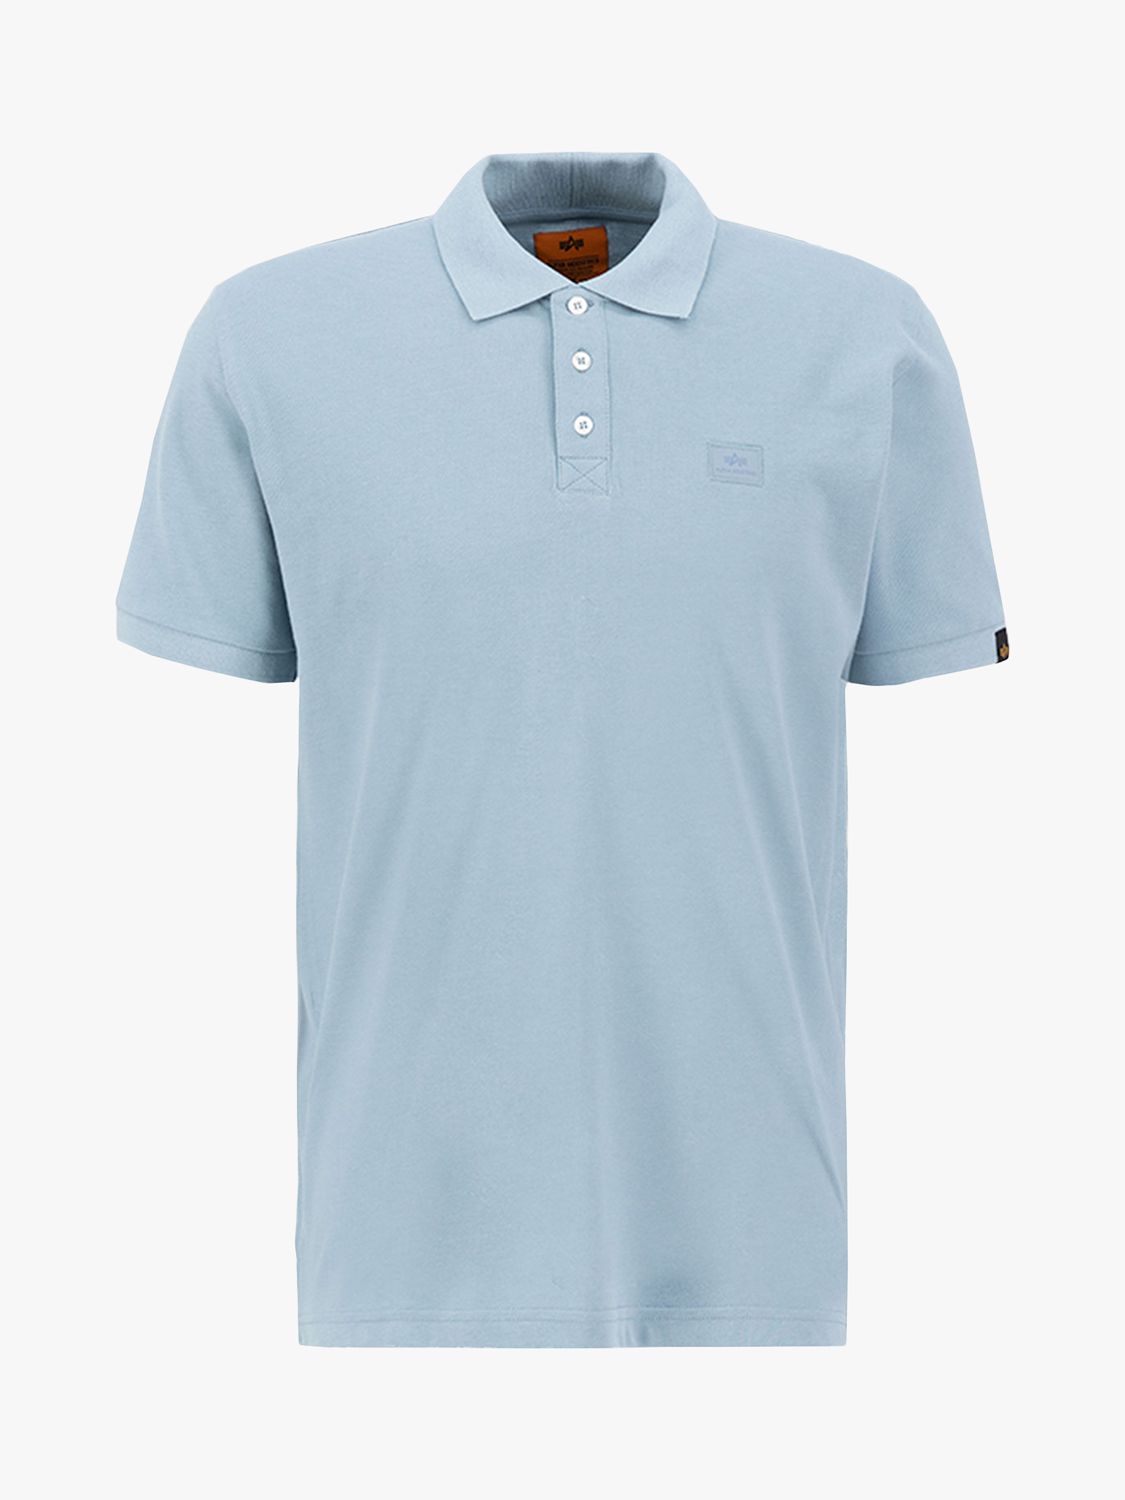 Alpha Industries X-Fit Polo, Greyblue at John Lewis & Partners | Poloshirts